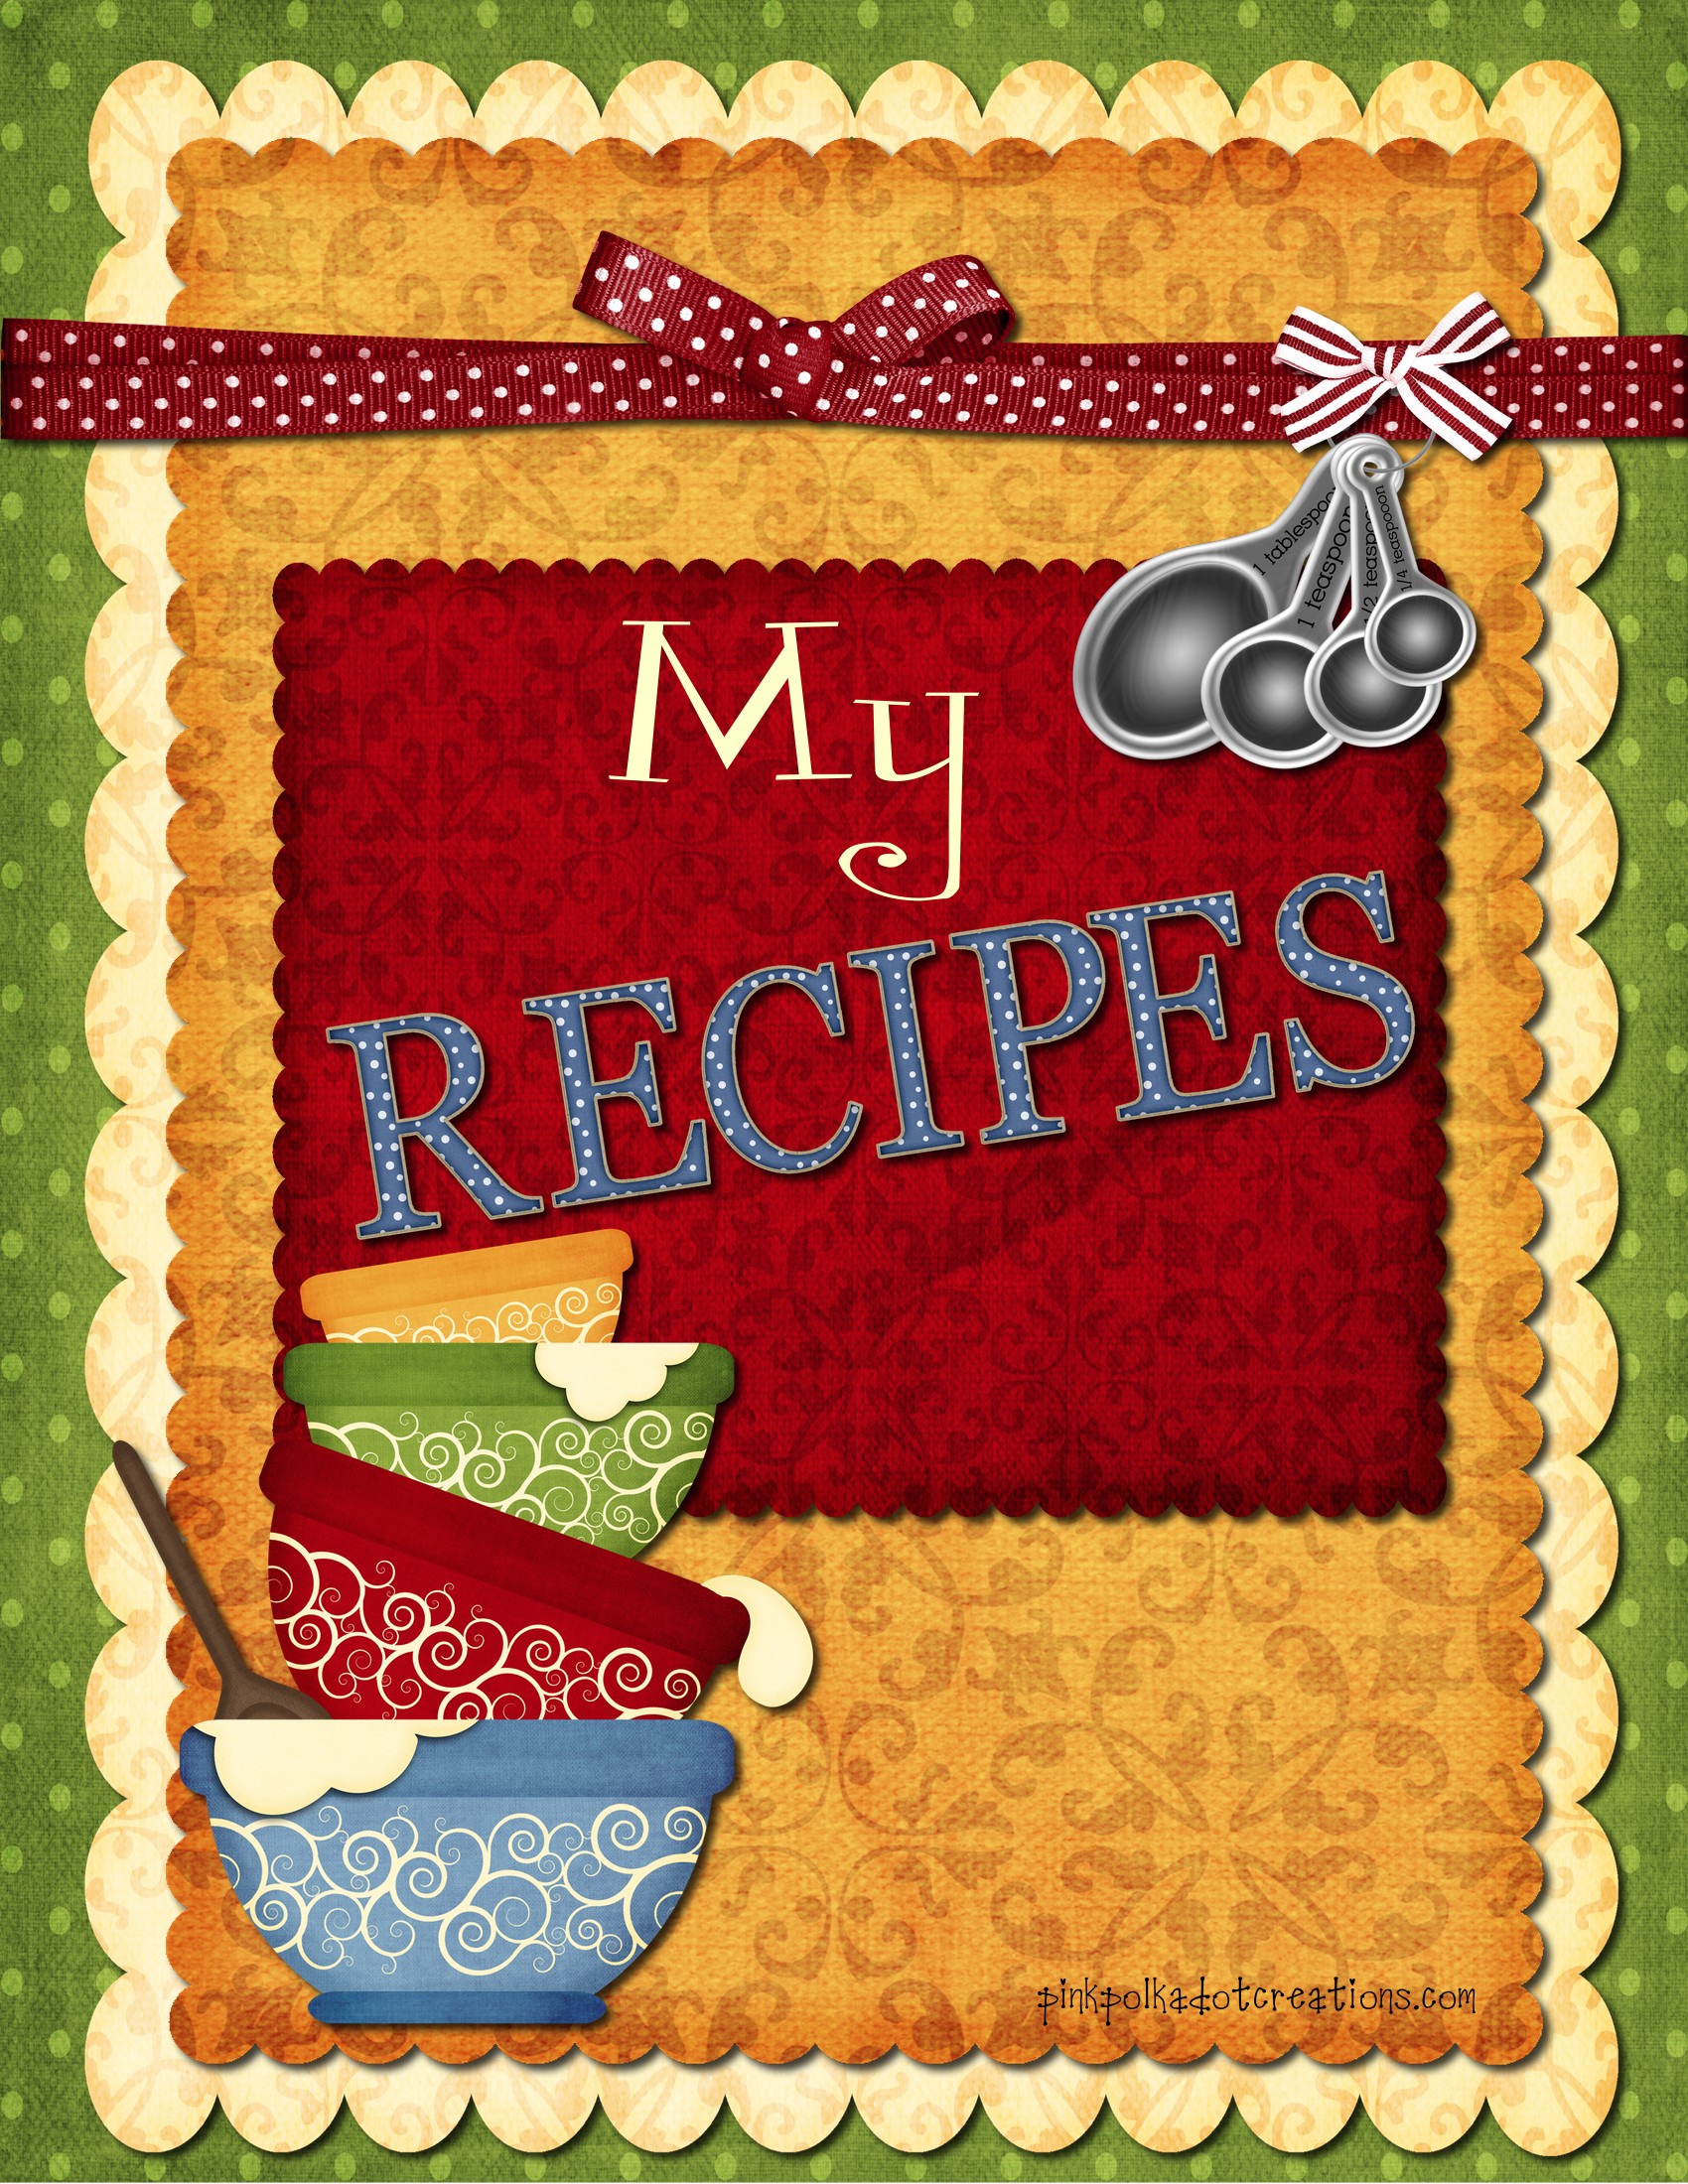 6-best-images-of-recipe-cookbook-cover-printables-printable-recipe-binder-cover-templates